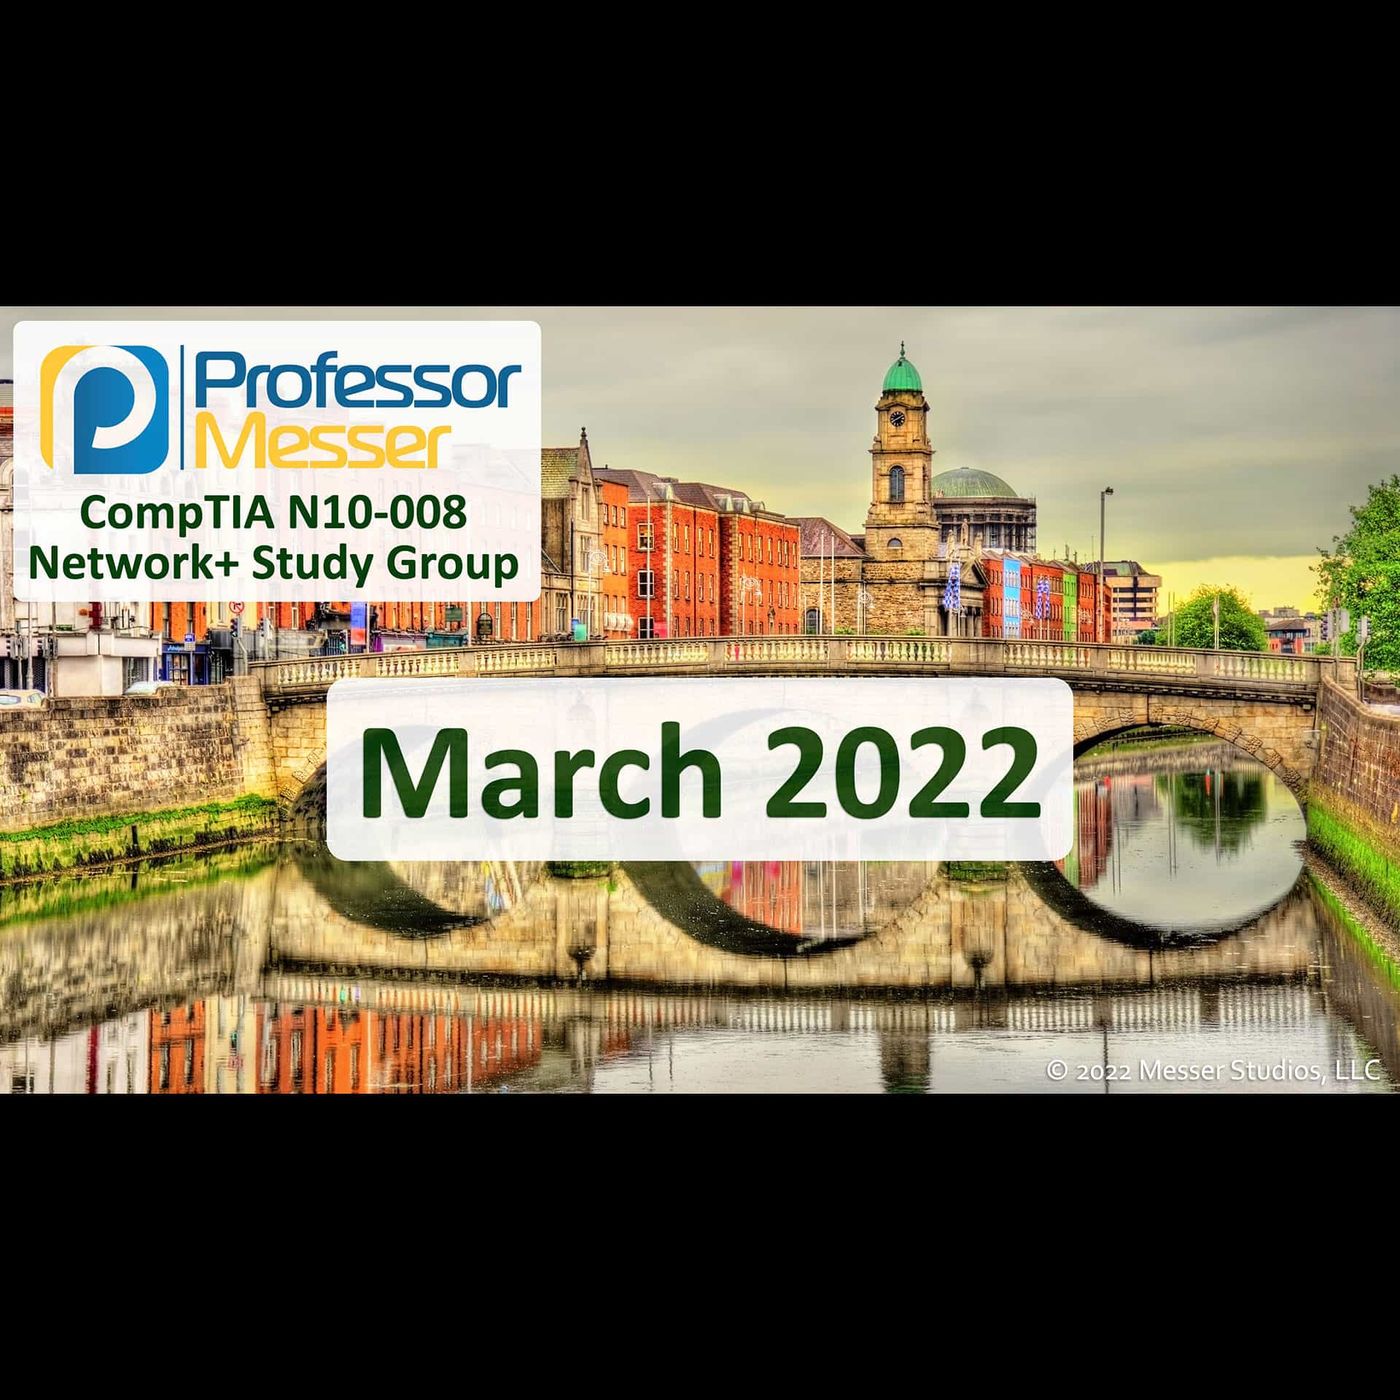 Professor Messer's N10-008 Network+ Study Group - March 2022